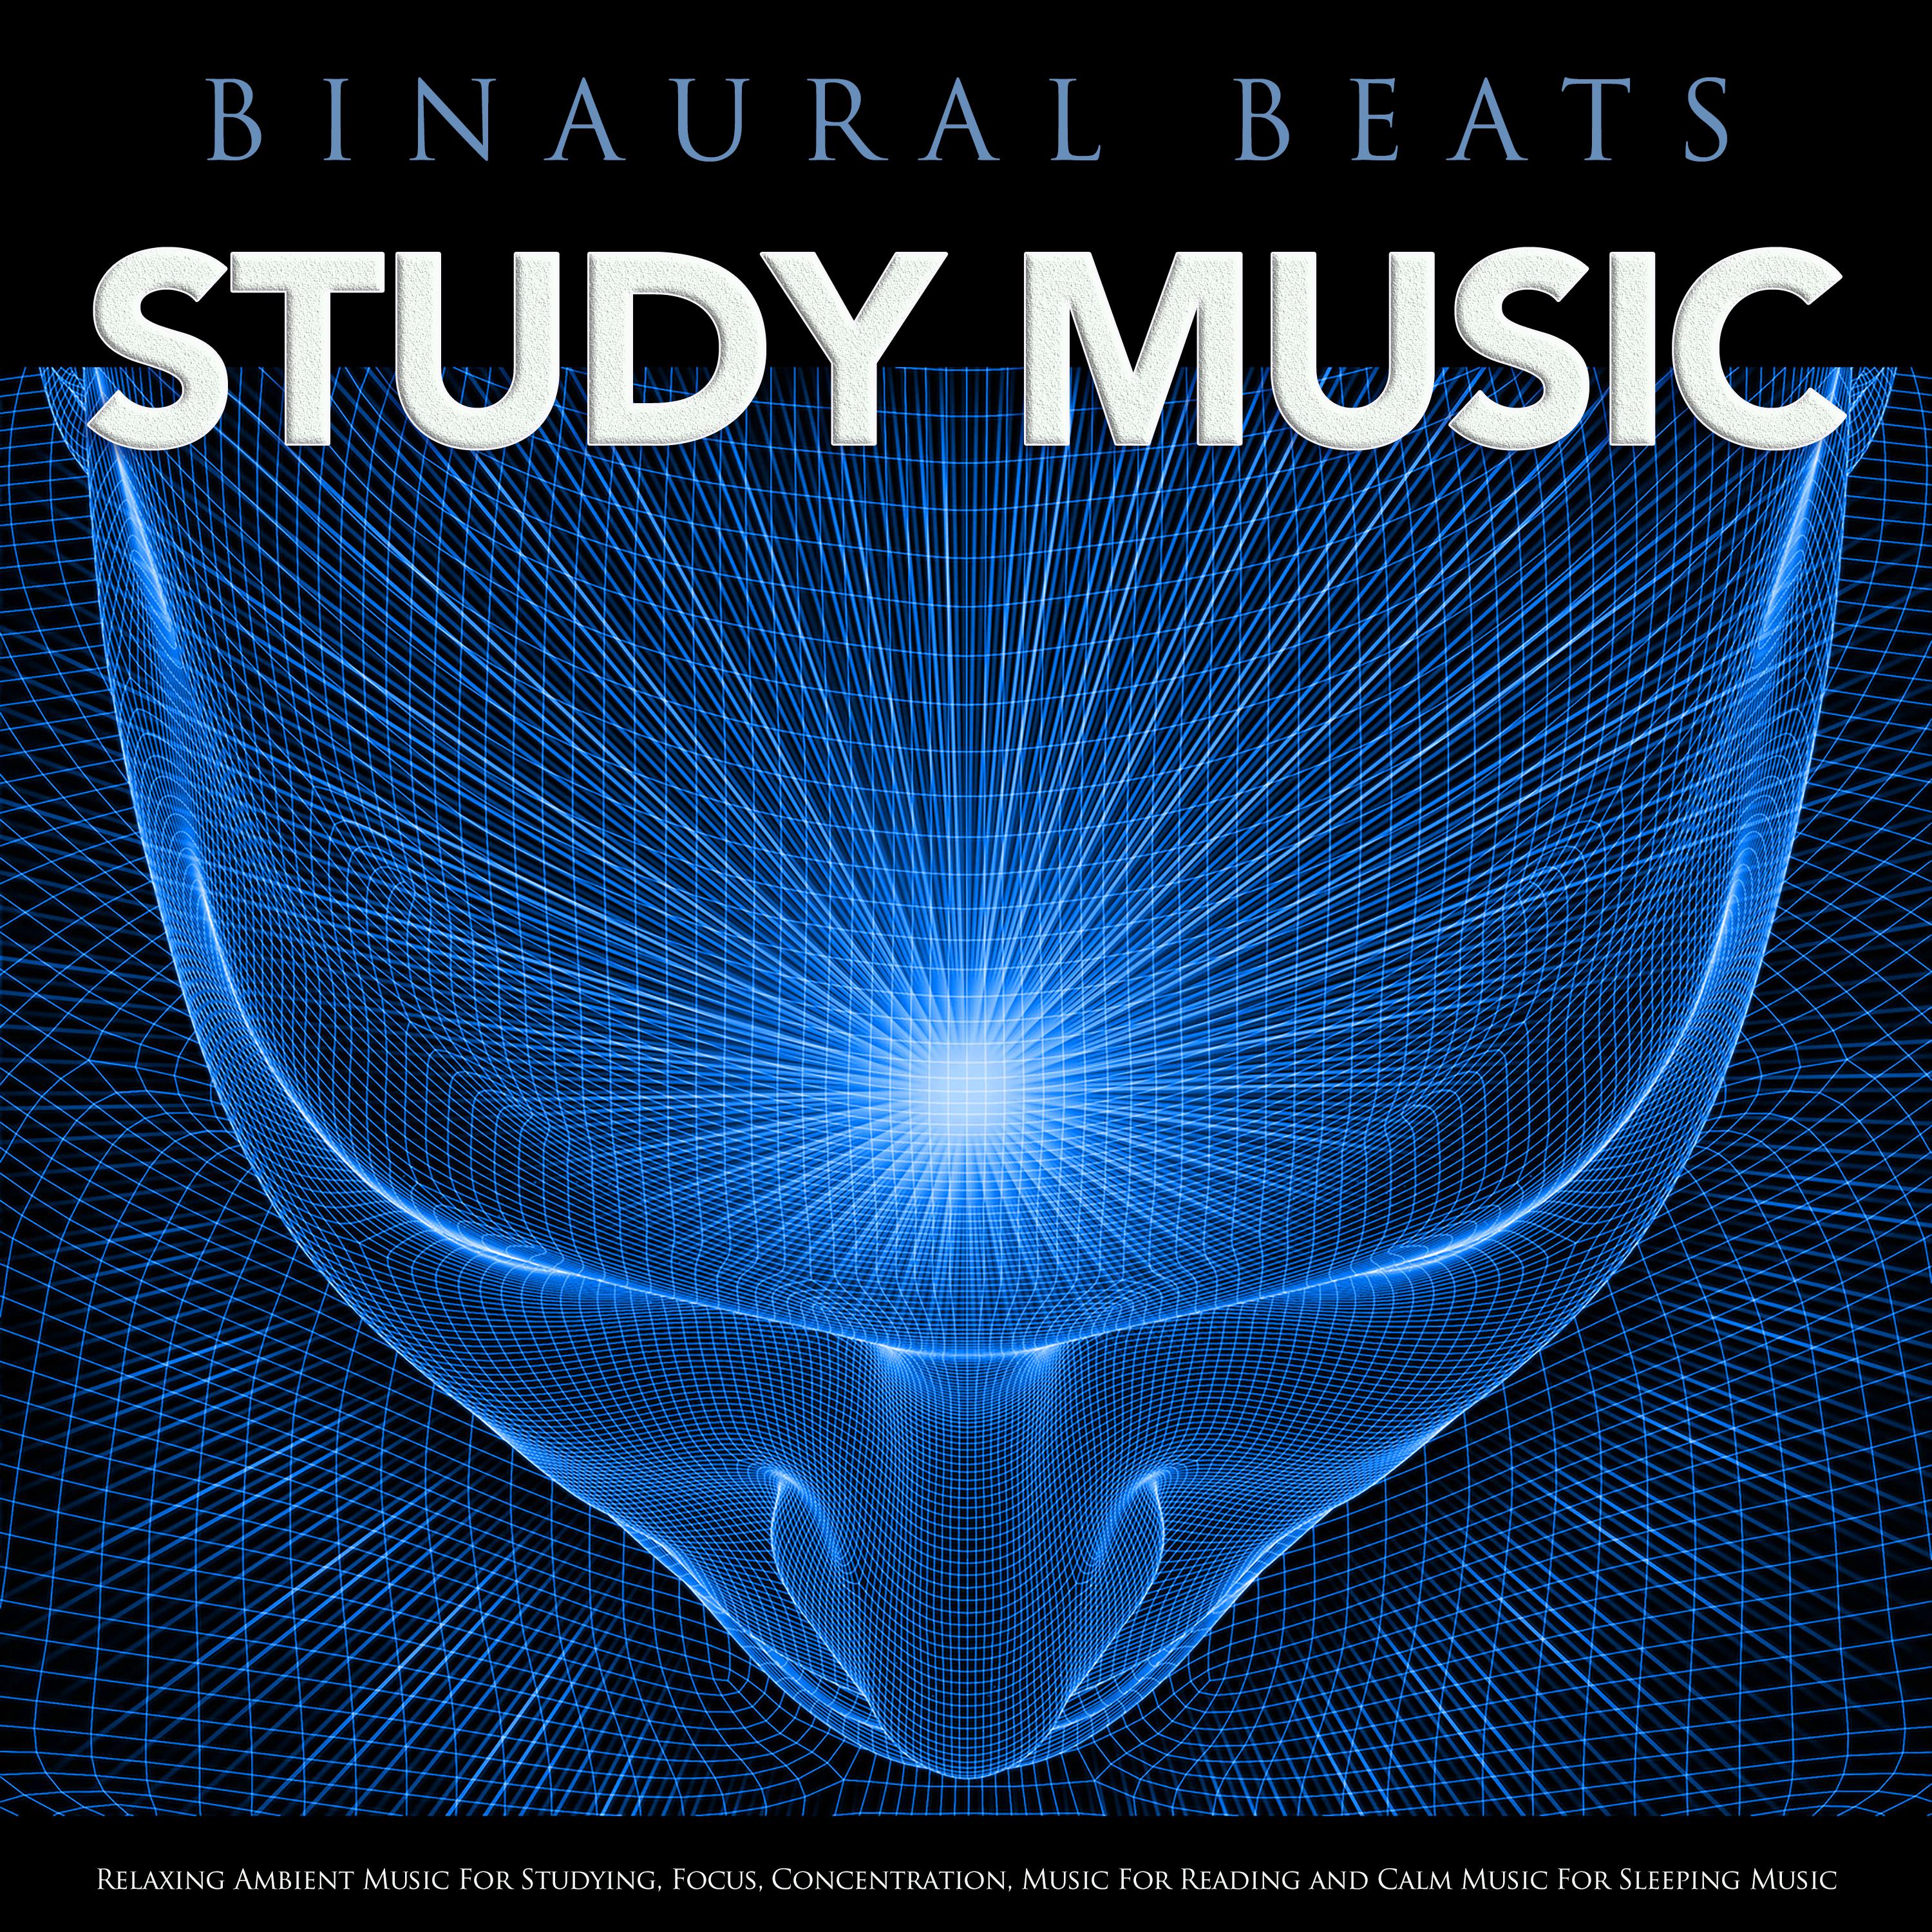 Binaural Beats Study Music: Relaxing Ambient Music For Studying, Focus, Concentration, Music For Reading and Calm Music For Sleeping Music